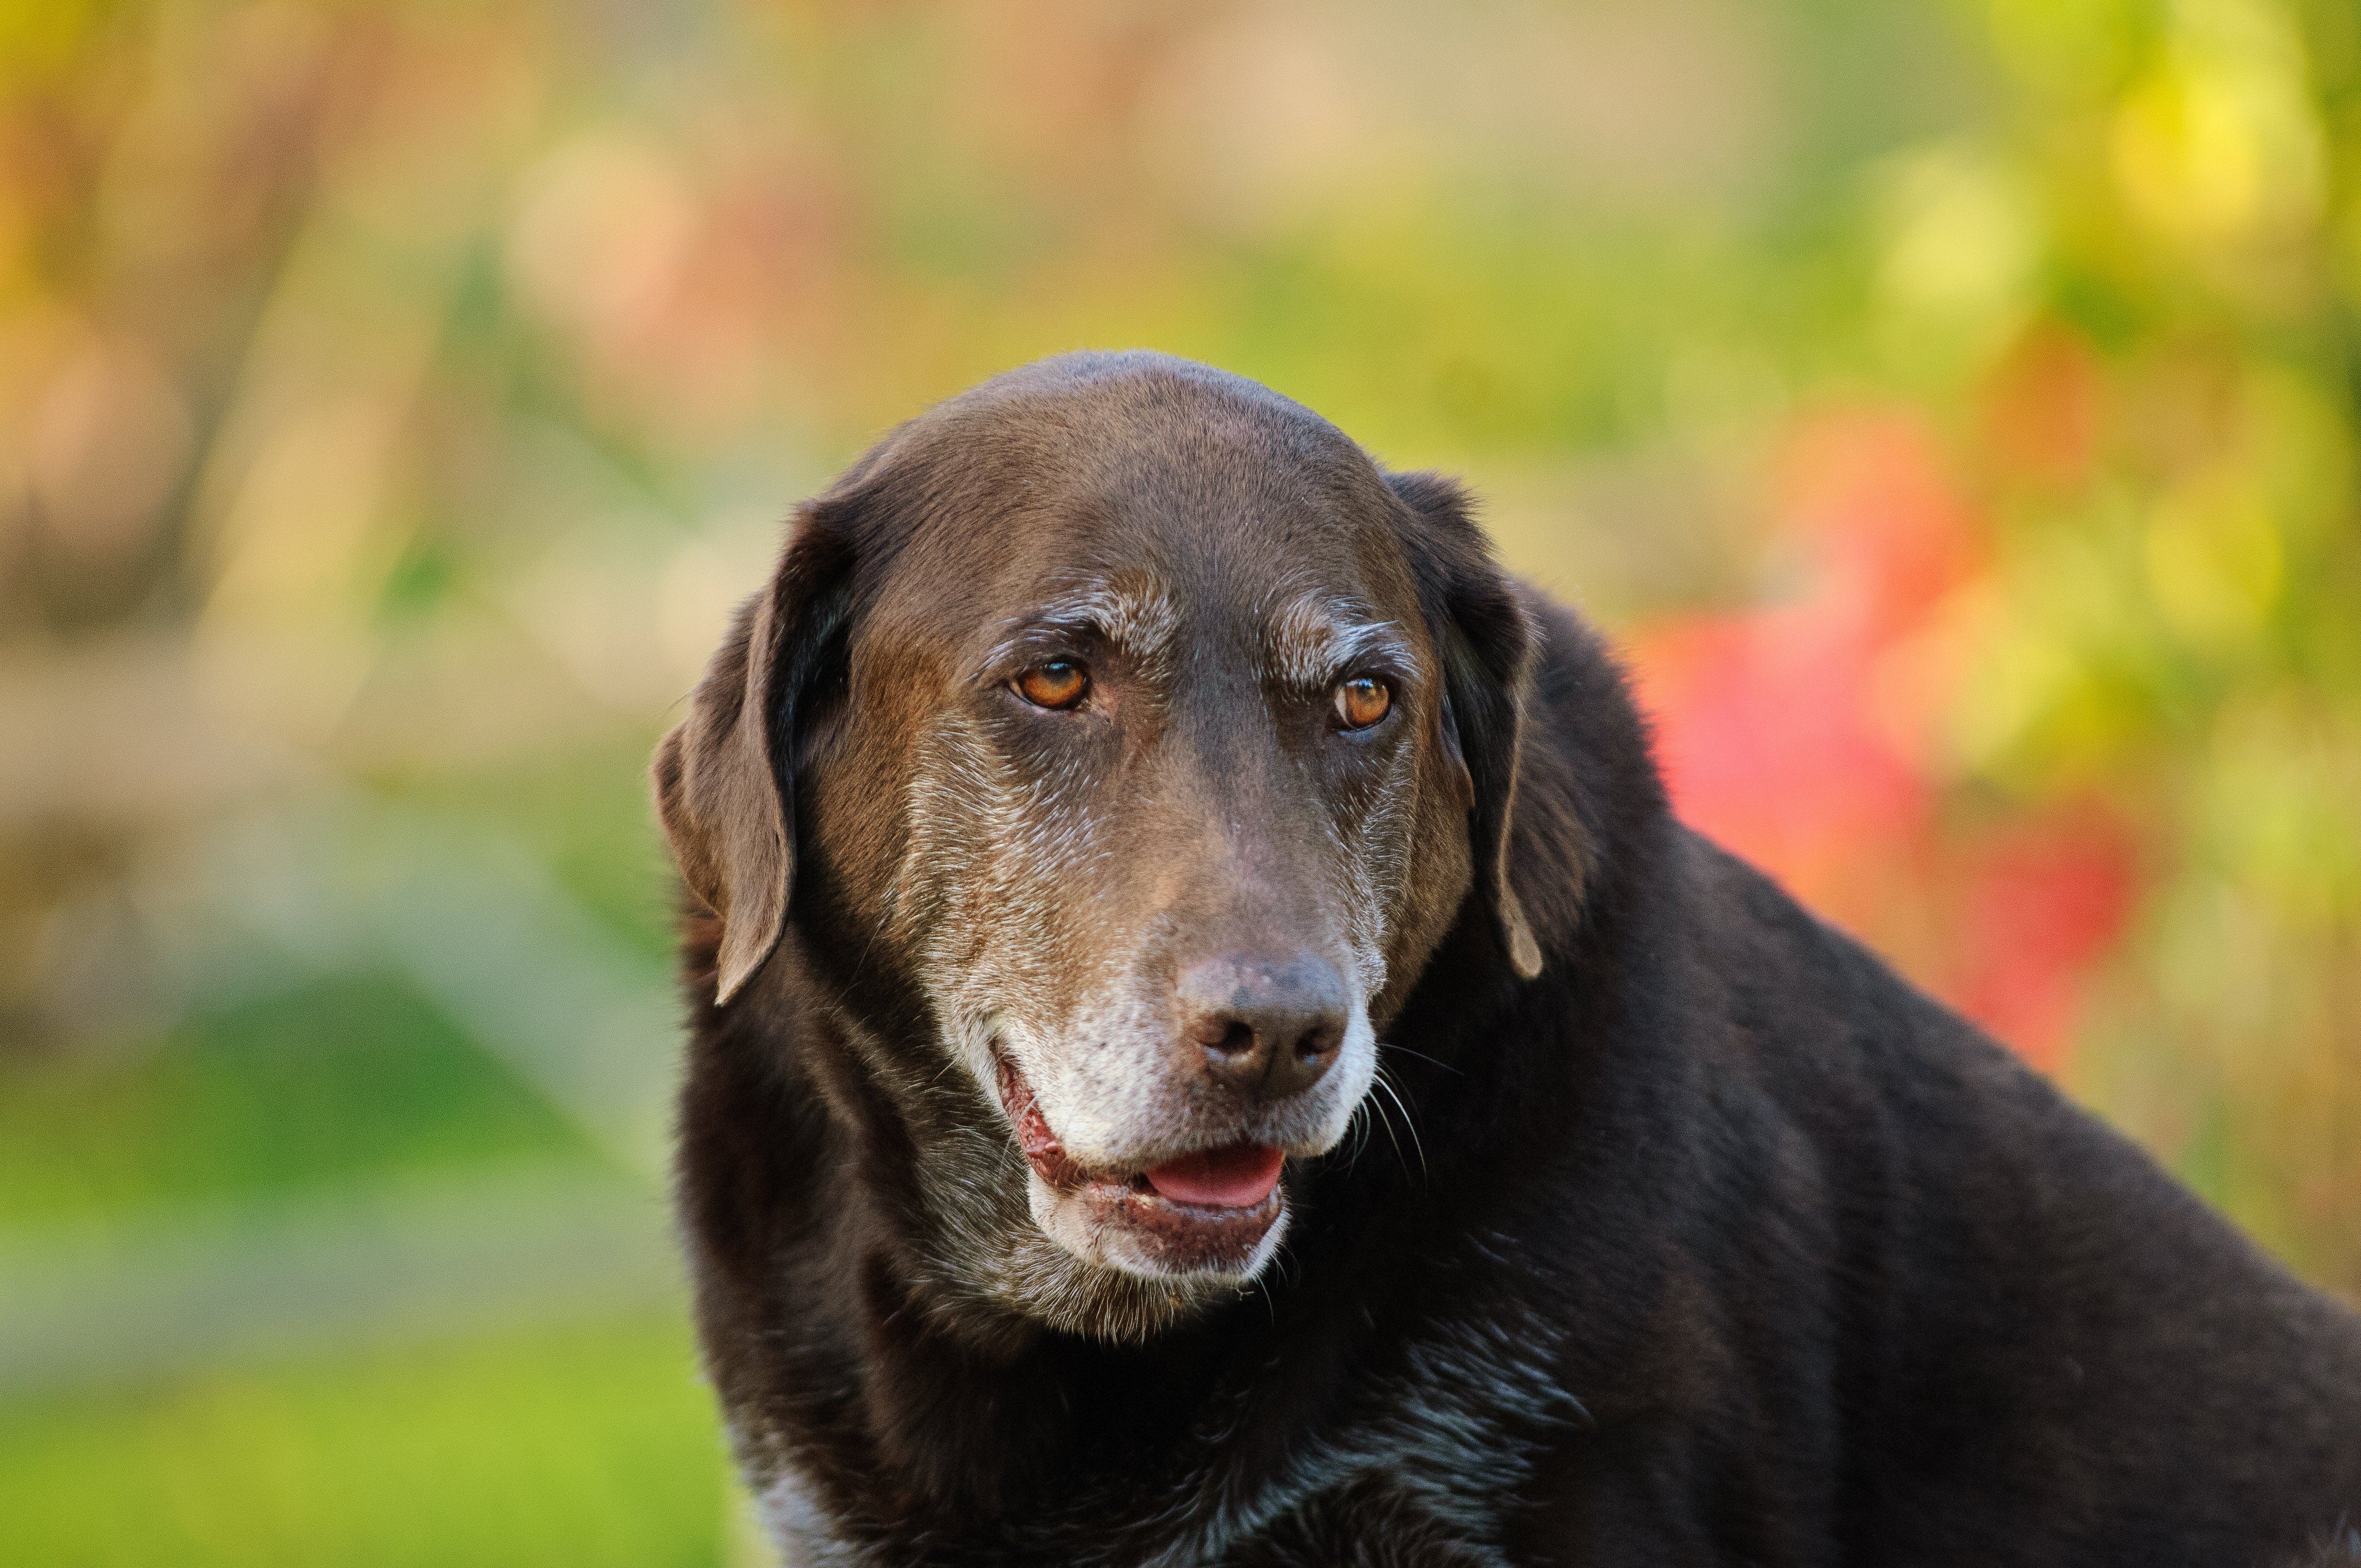 A black dog sits outdoors | Photo: Shutterstock